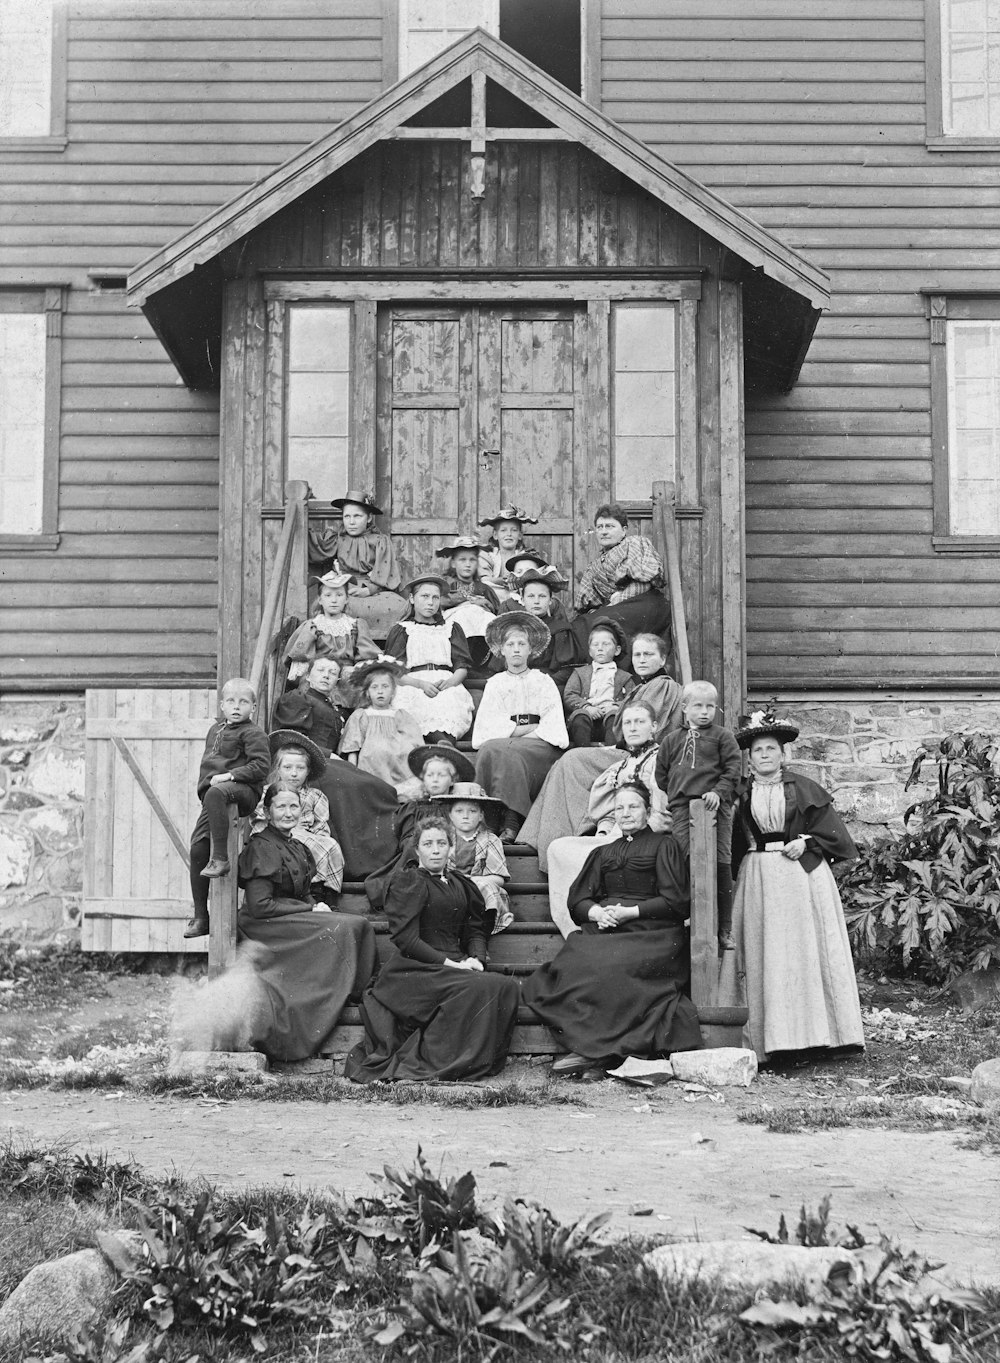 a group of people sitting on the steps of a house